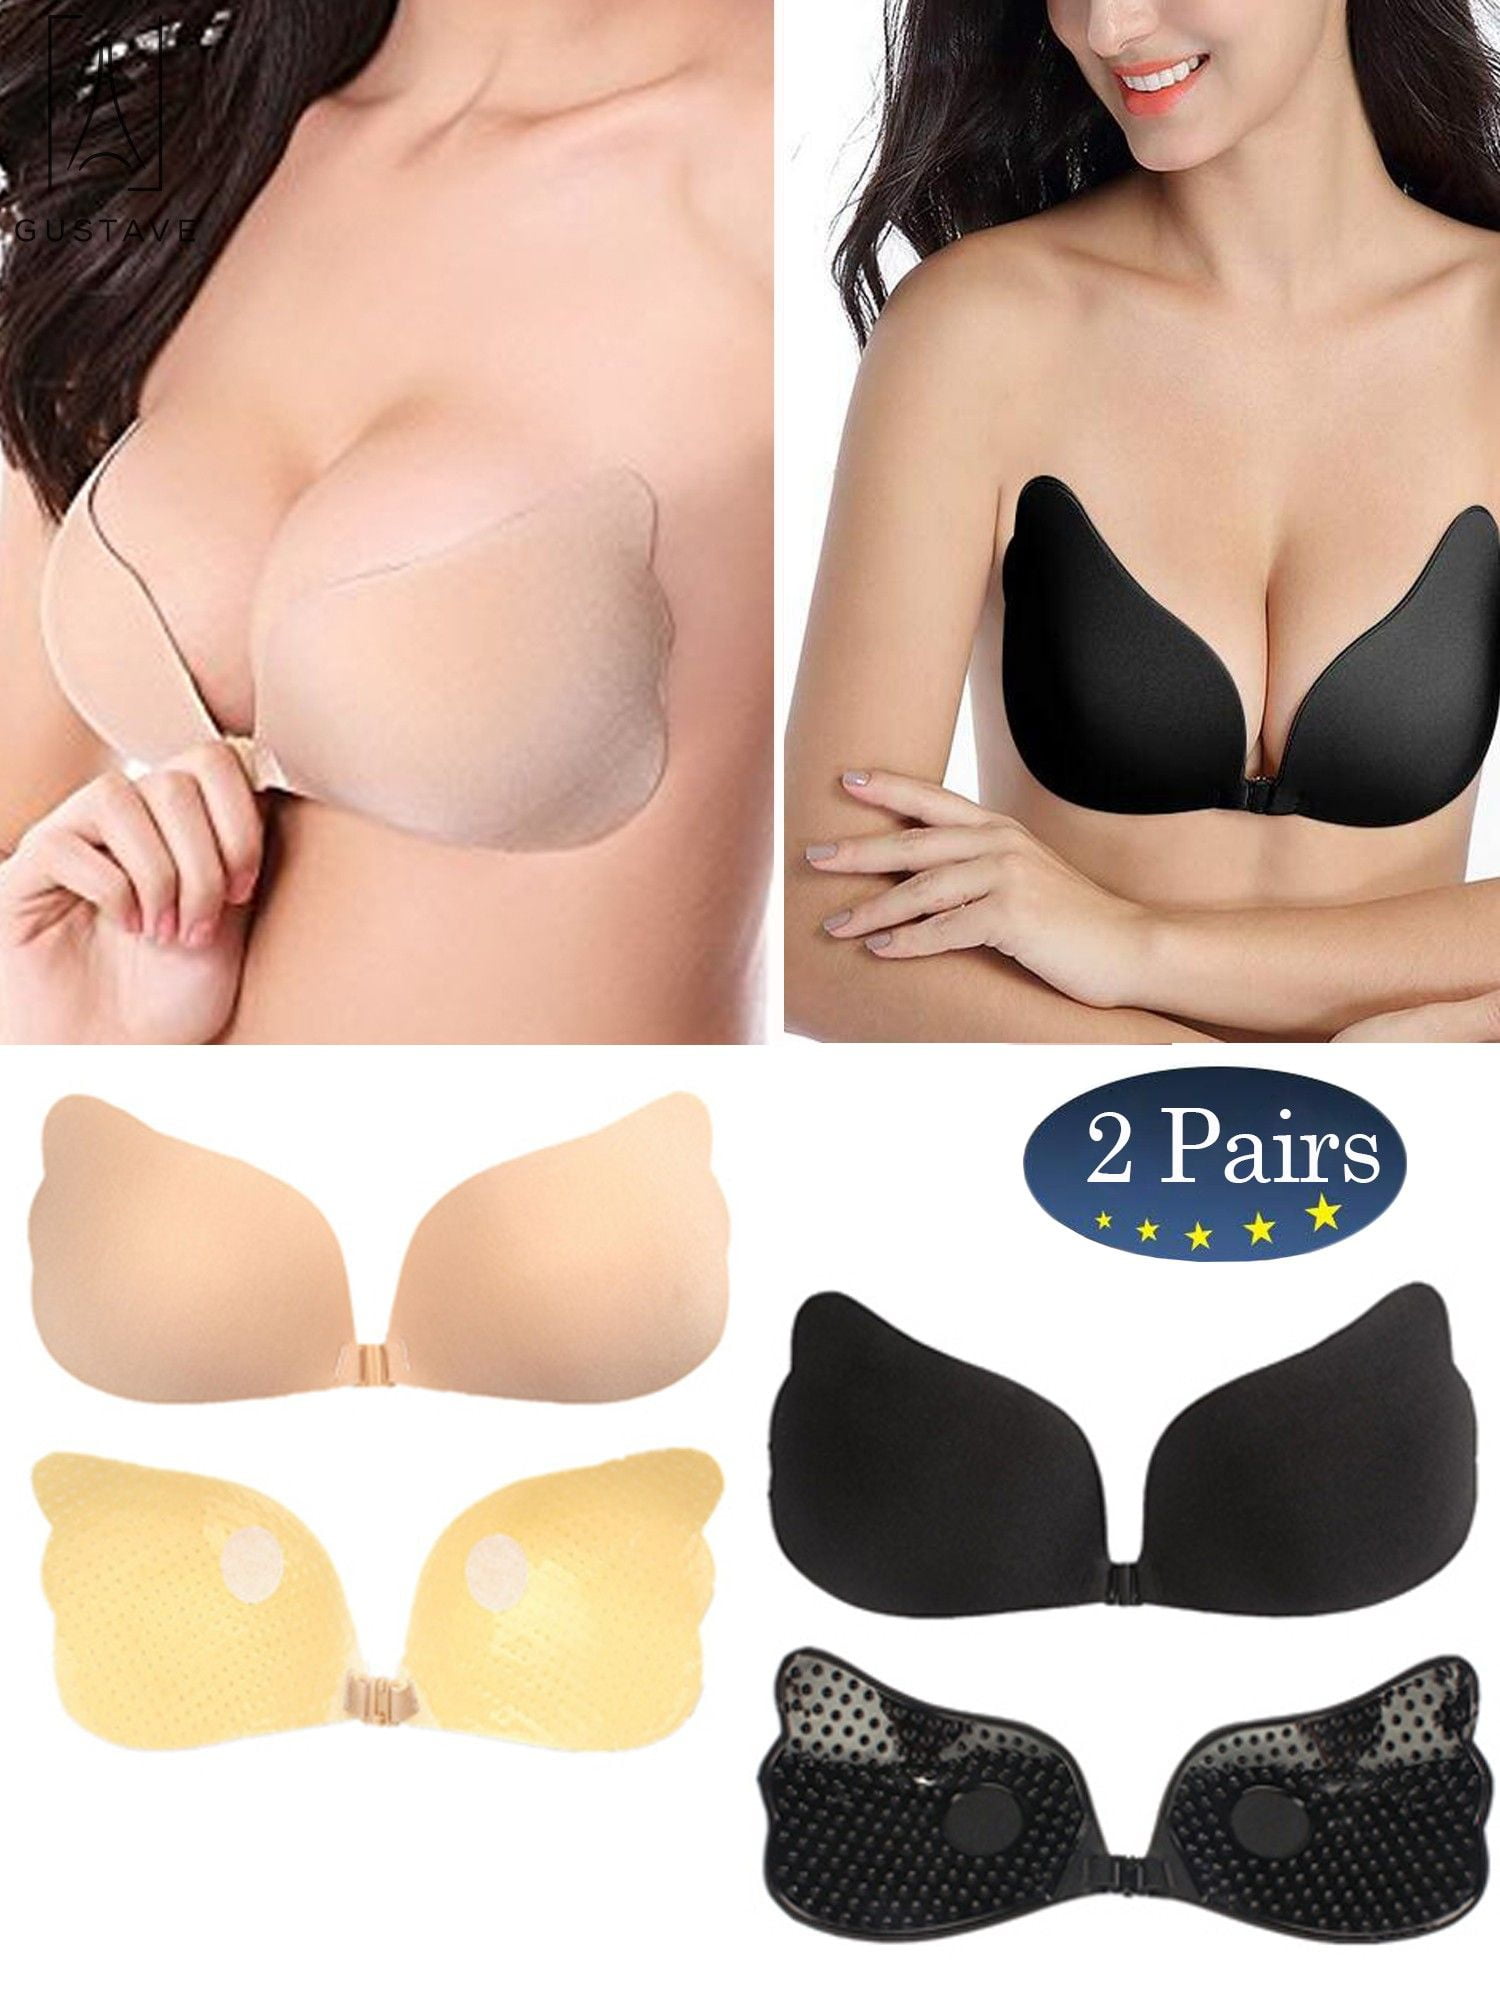 GustaveDesign 2 Packs Women's Sexy Strapless Invisible Bra